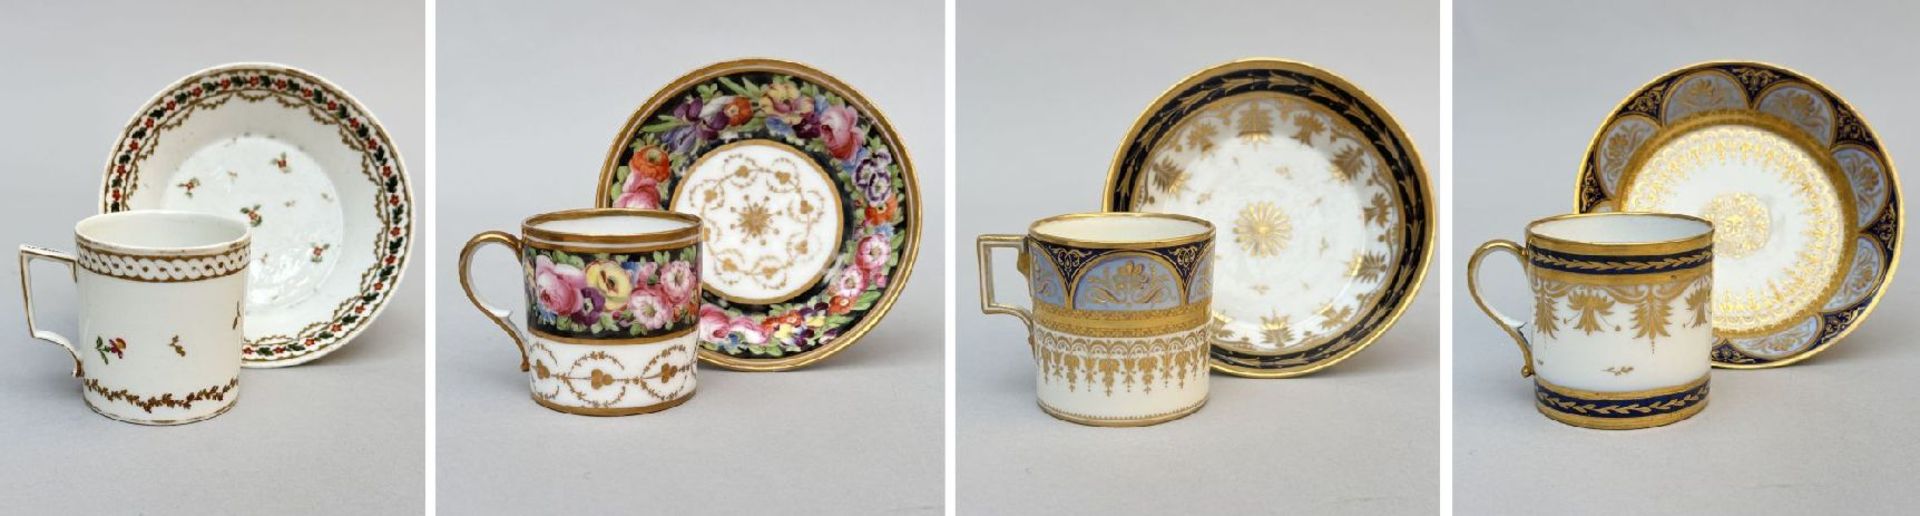 Lot: 4 bags and saucers in Empire porcelain, including two by Pouyat et Russinger (*)